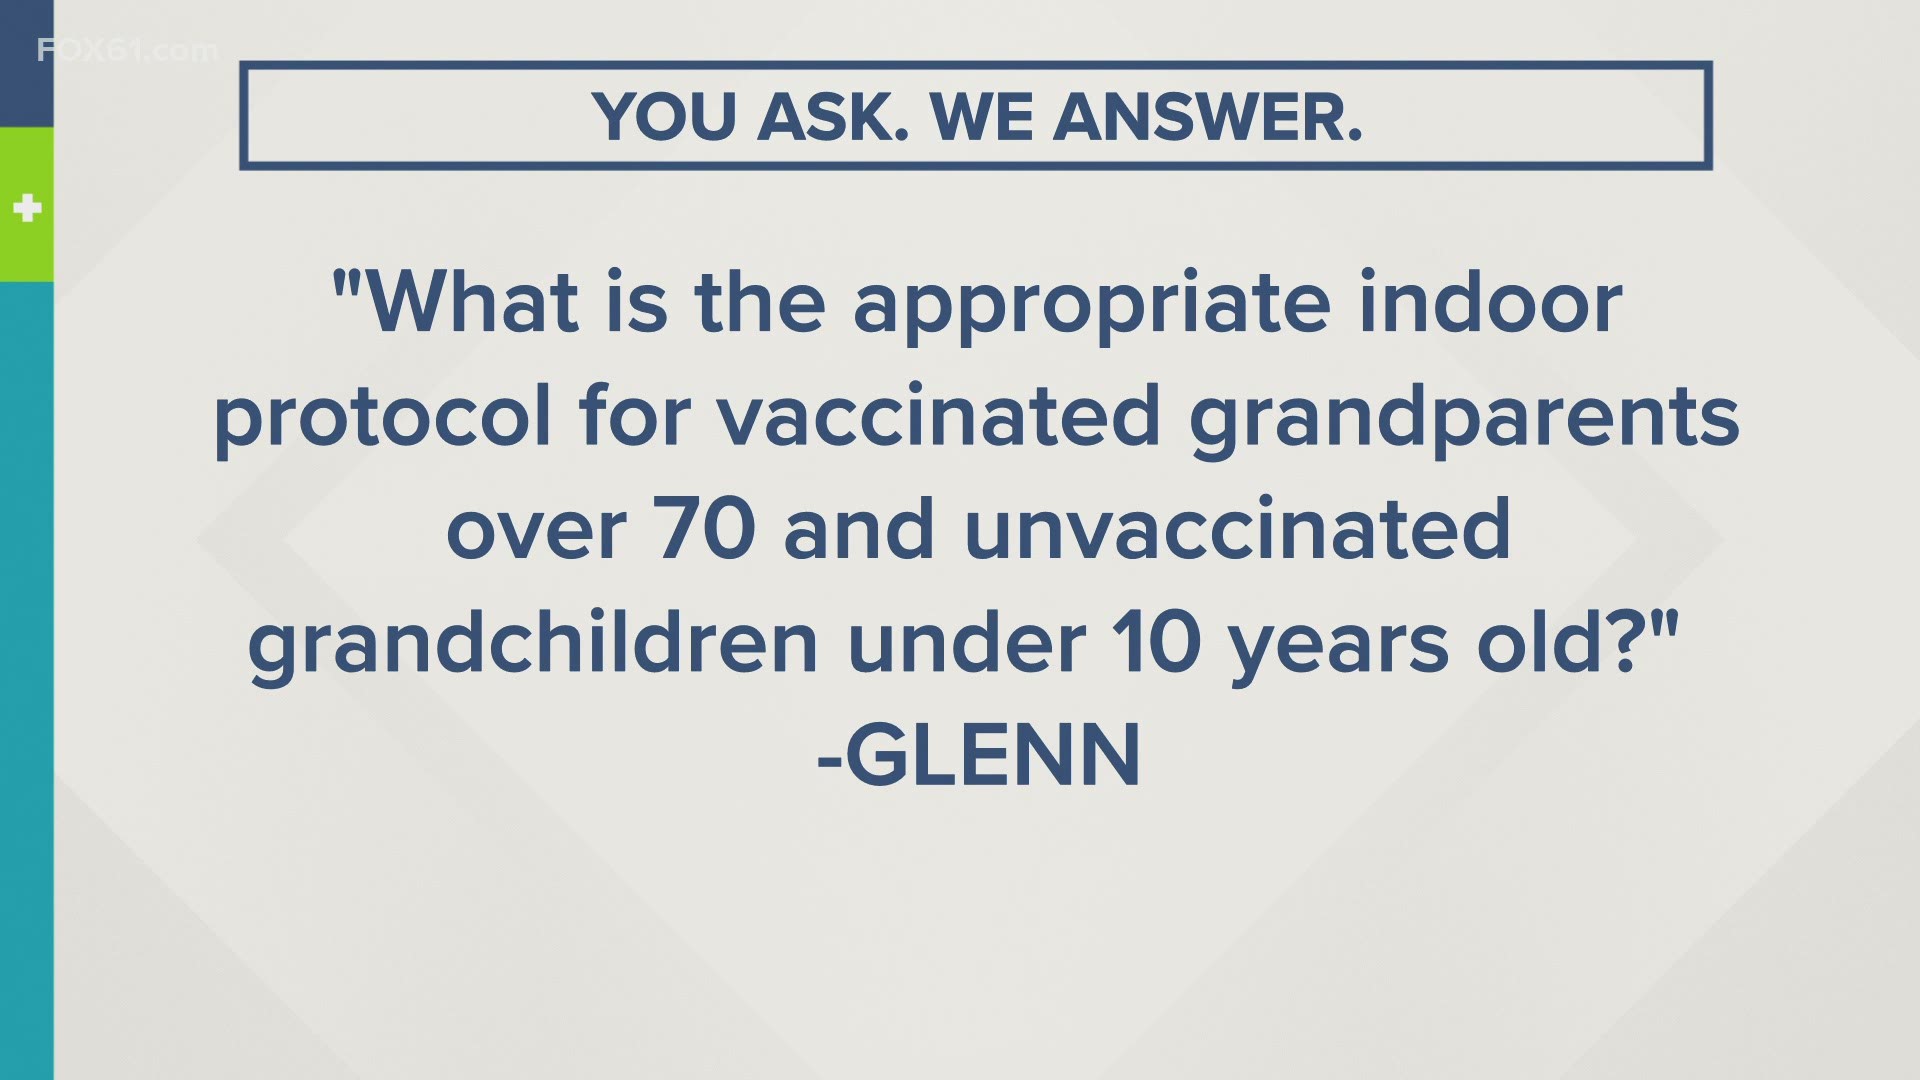 Gov. Lamont announced fully vaccinated CT residents will not be required to wear masks indoors starting May 19.